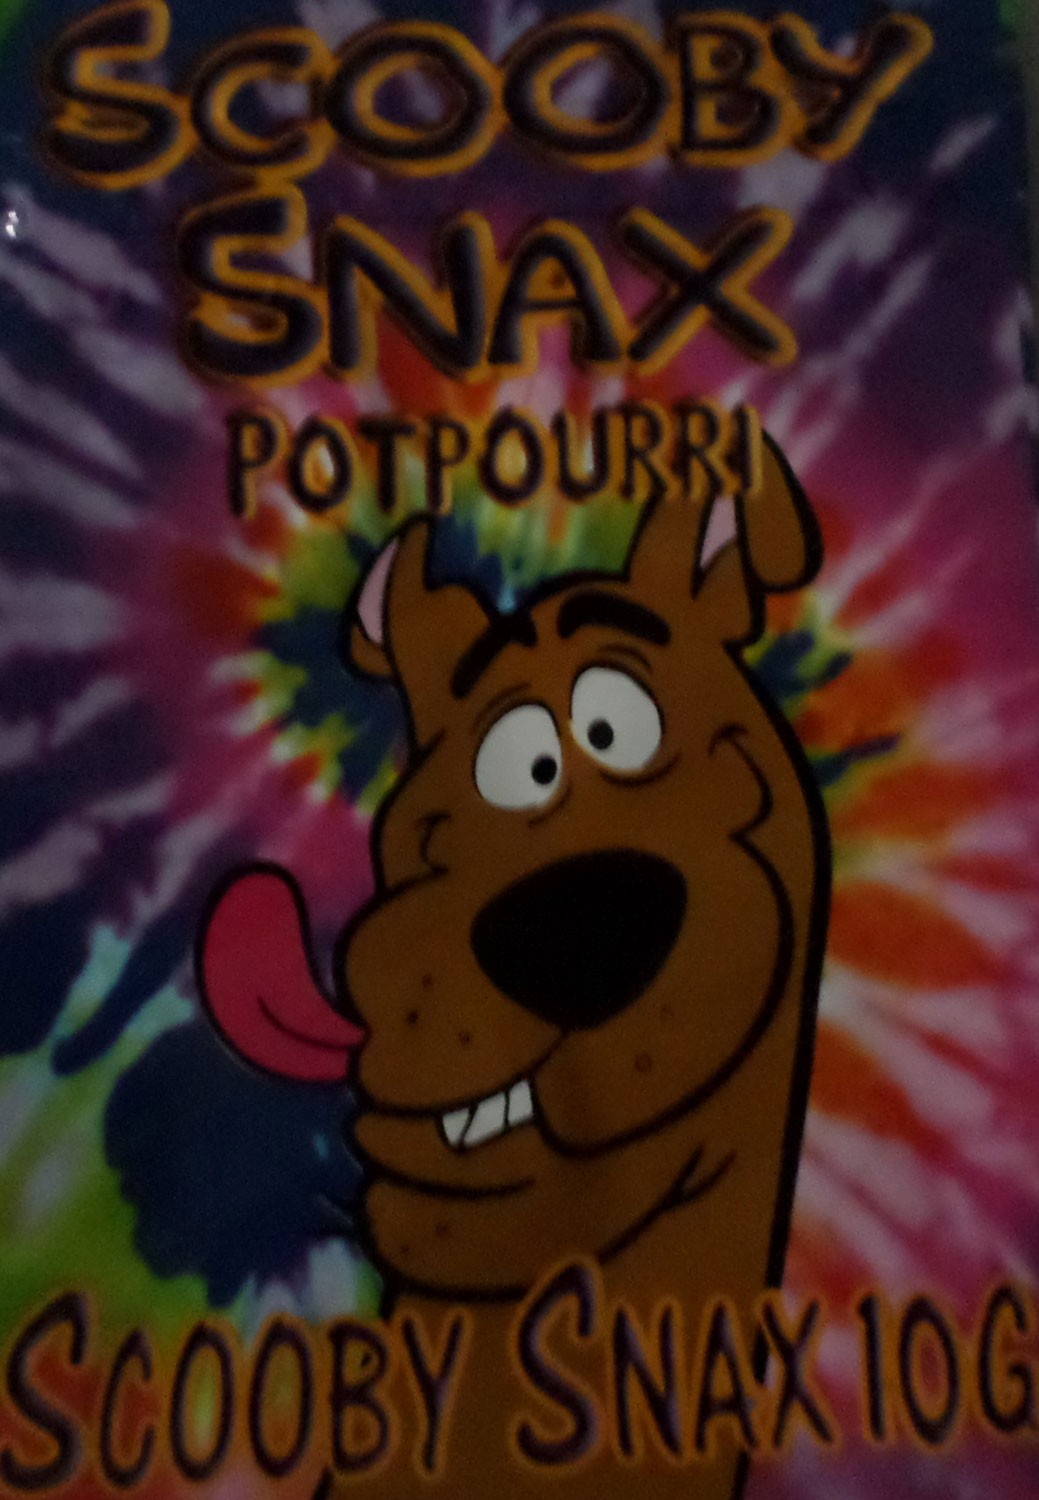 Scooby Snax 10g incense